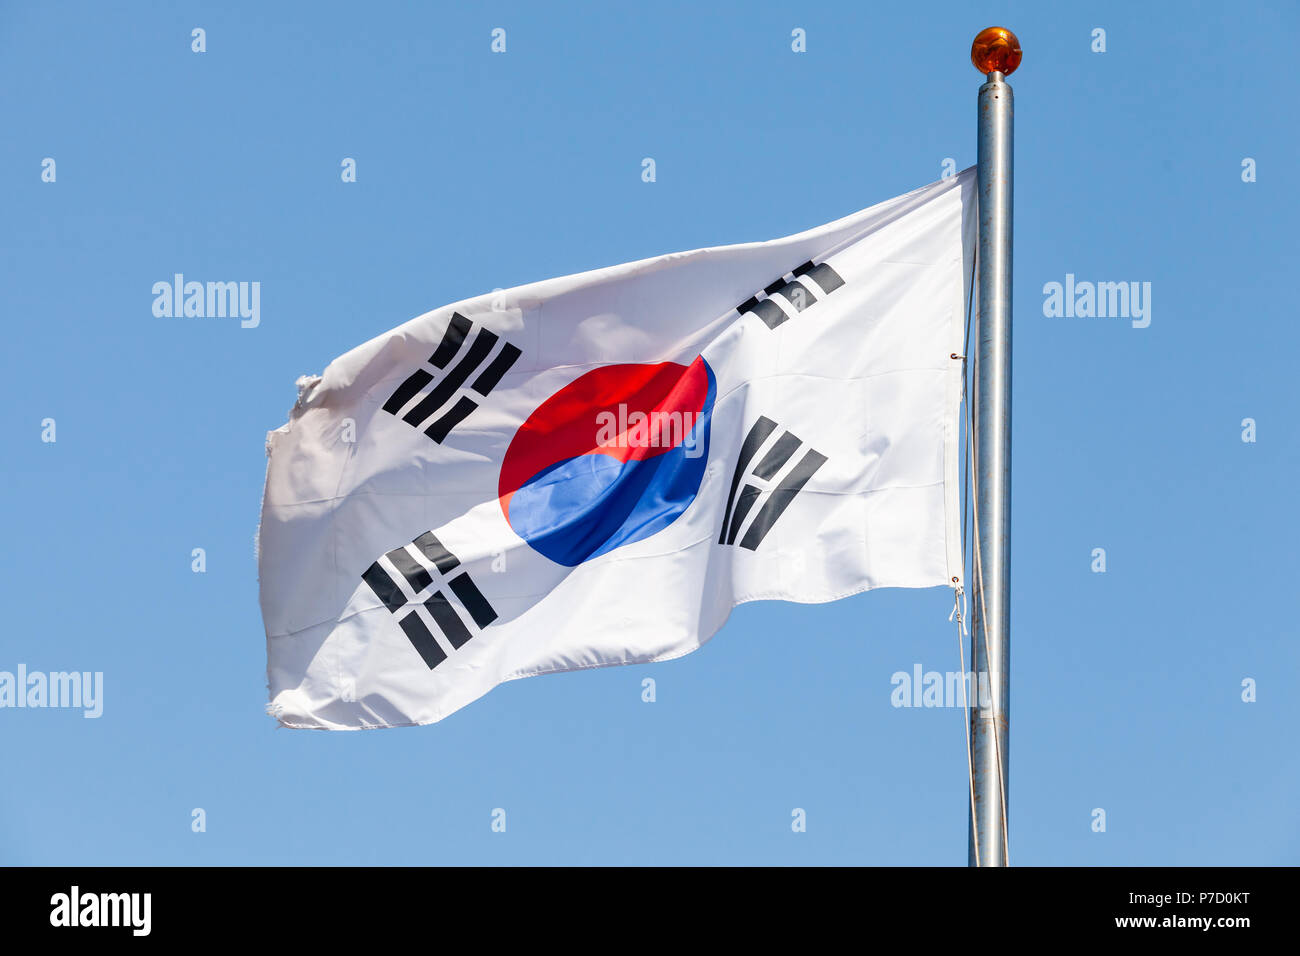 Flag of South Korea, also known as the Taegukgi waving on a flagpole over blue sky background Stock Photo